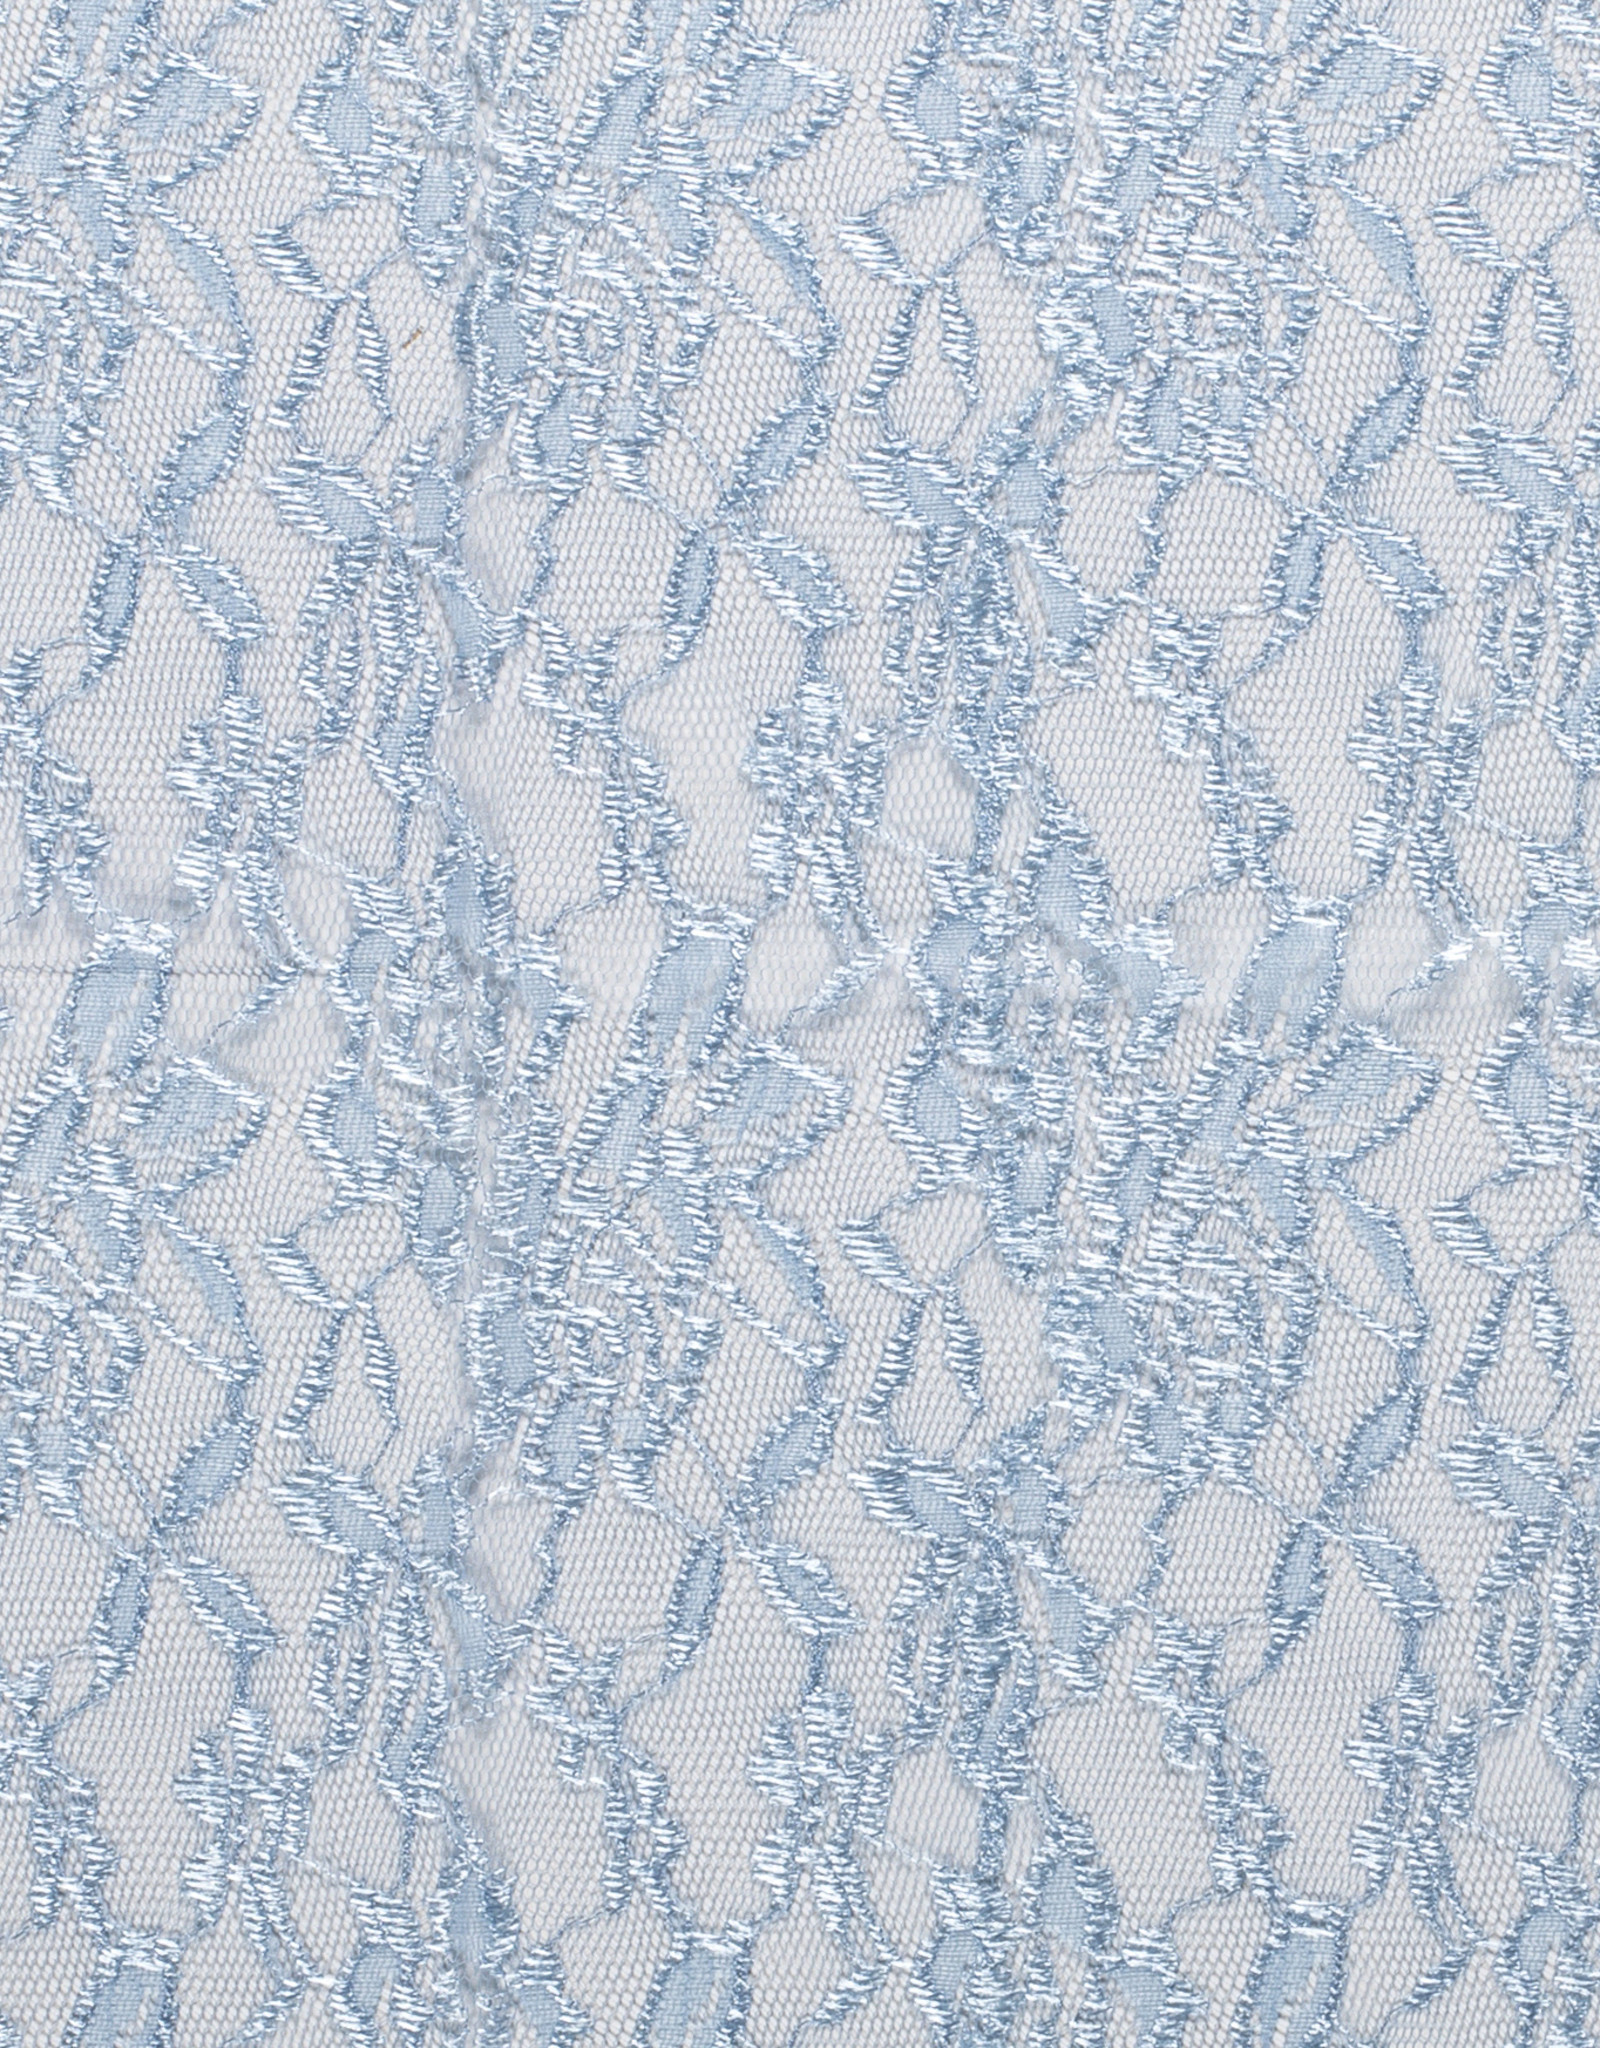 Nooteboom Kant lace flowers babyblue